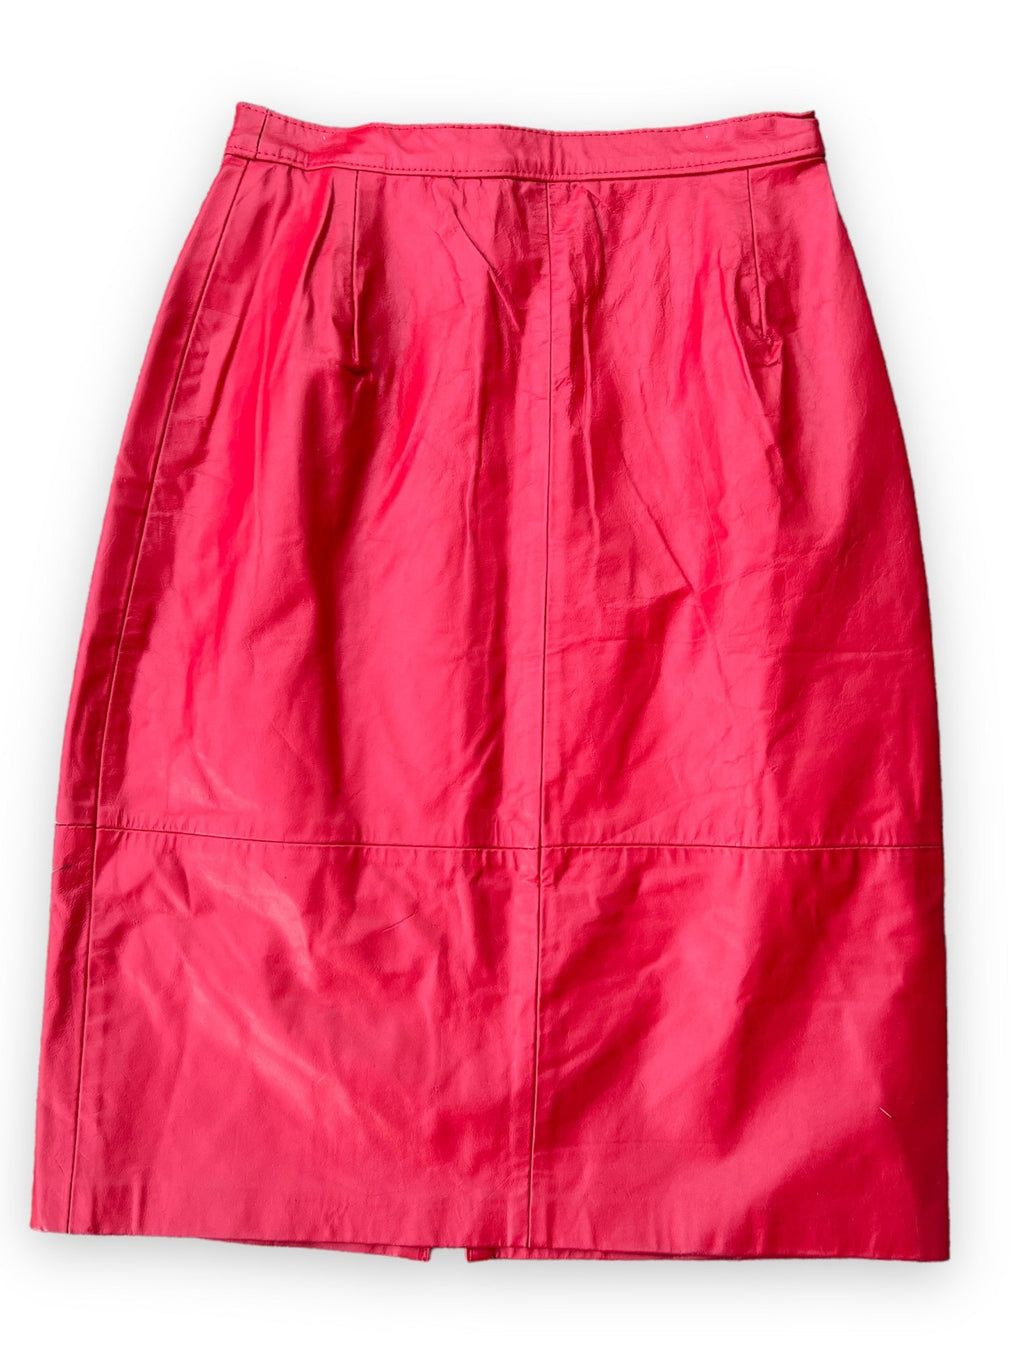 COMINT RED LEATHER SKIRT